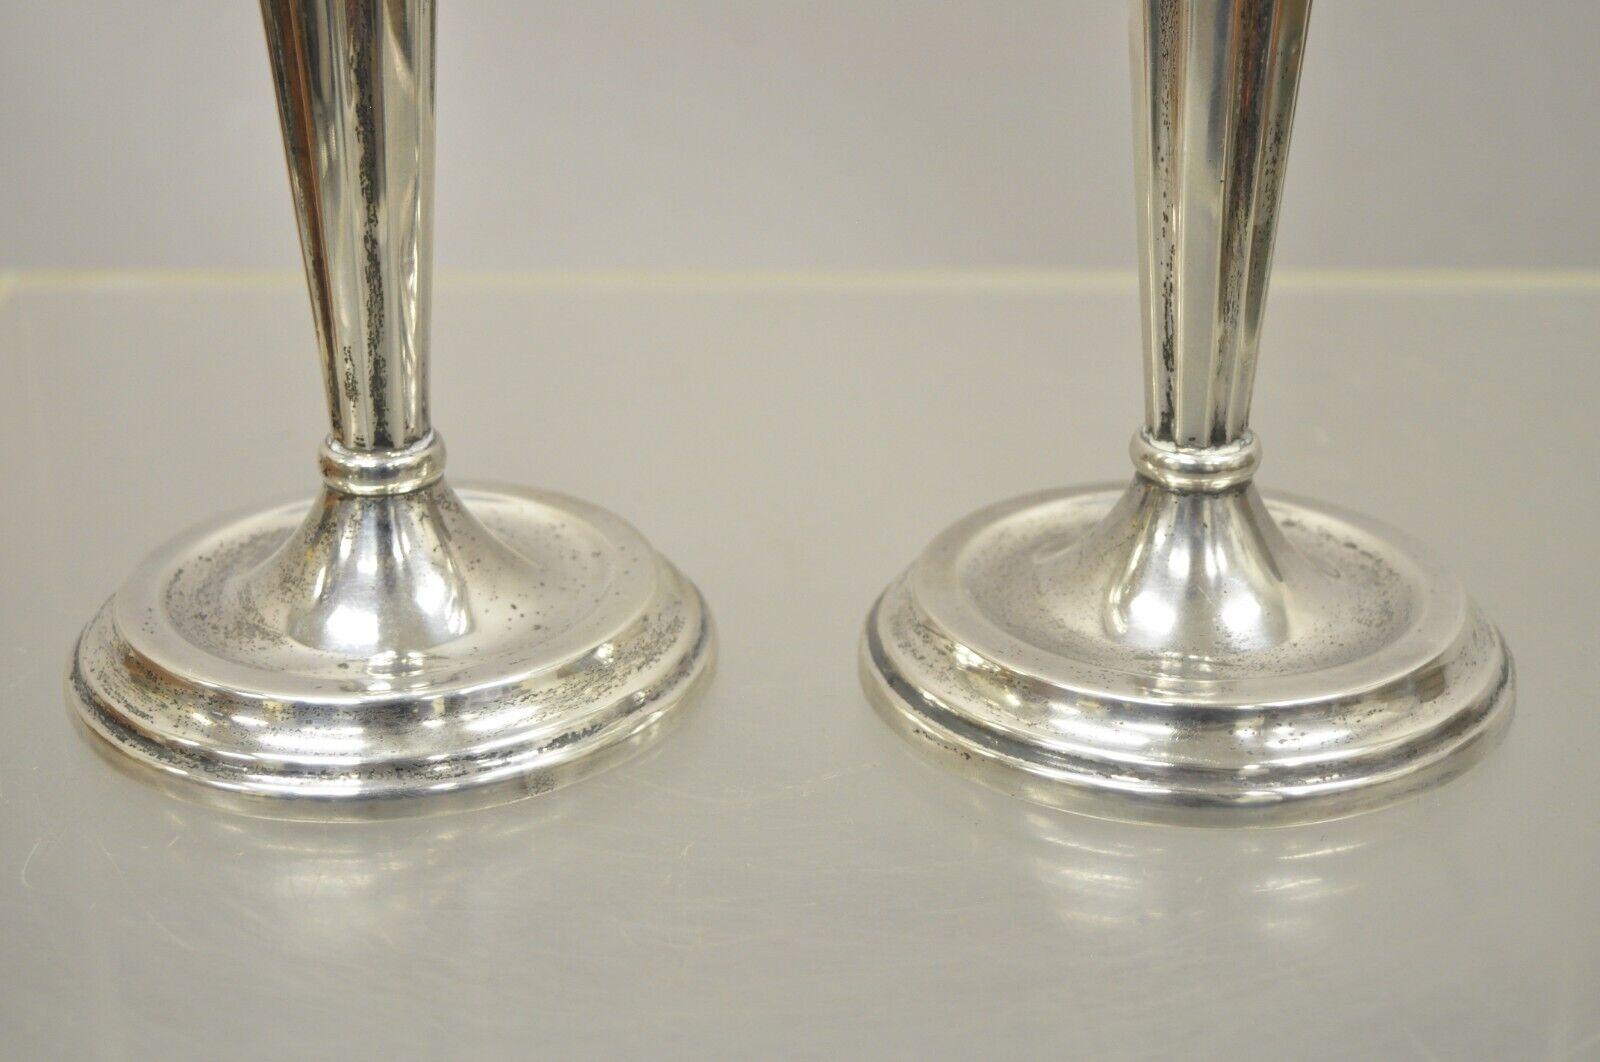 Vintage Sterling Silver 925 English Regency Style Candlesticks, a Pair For Sale 4